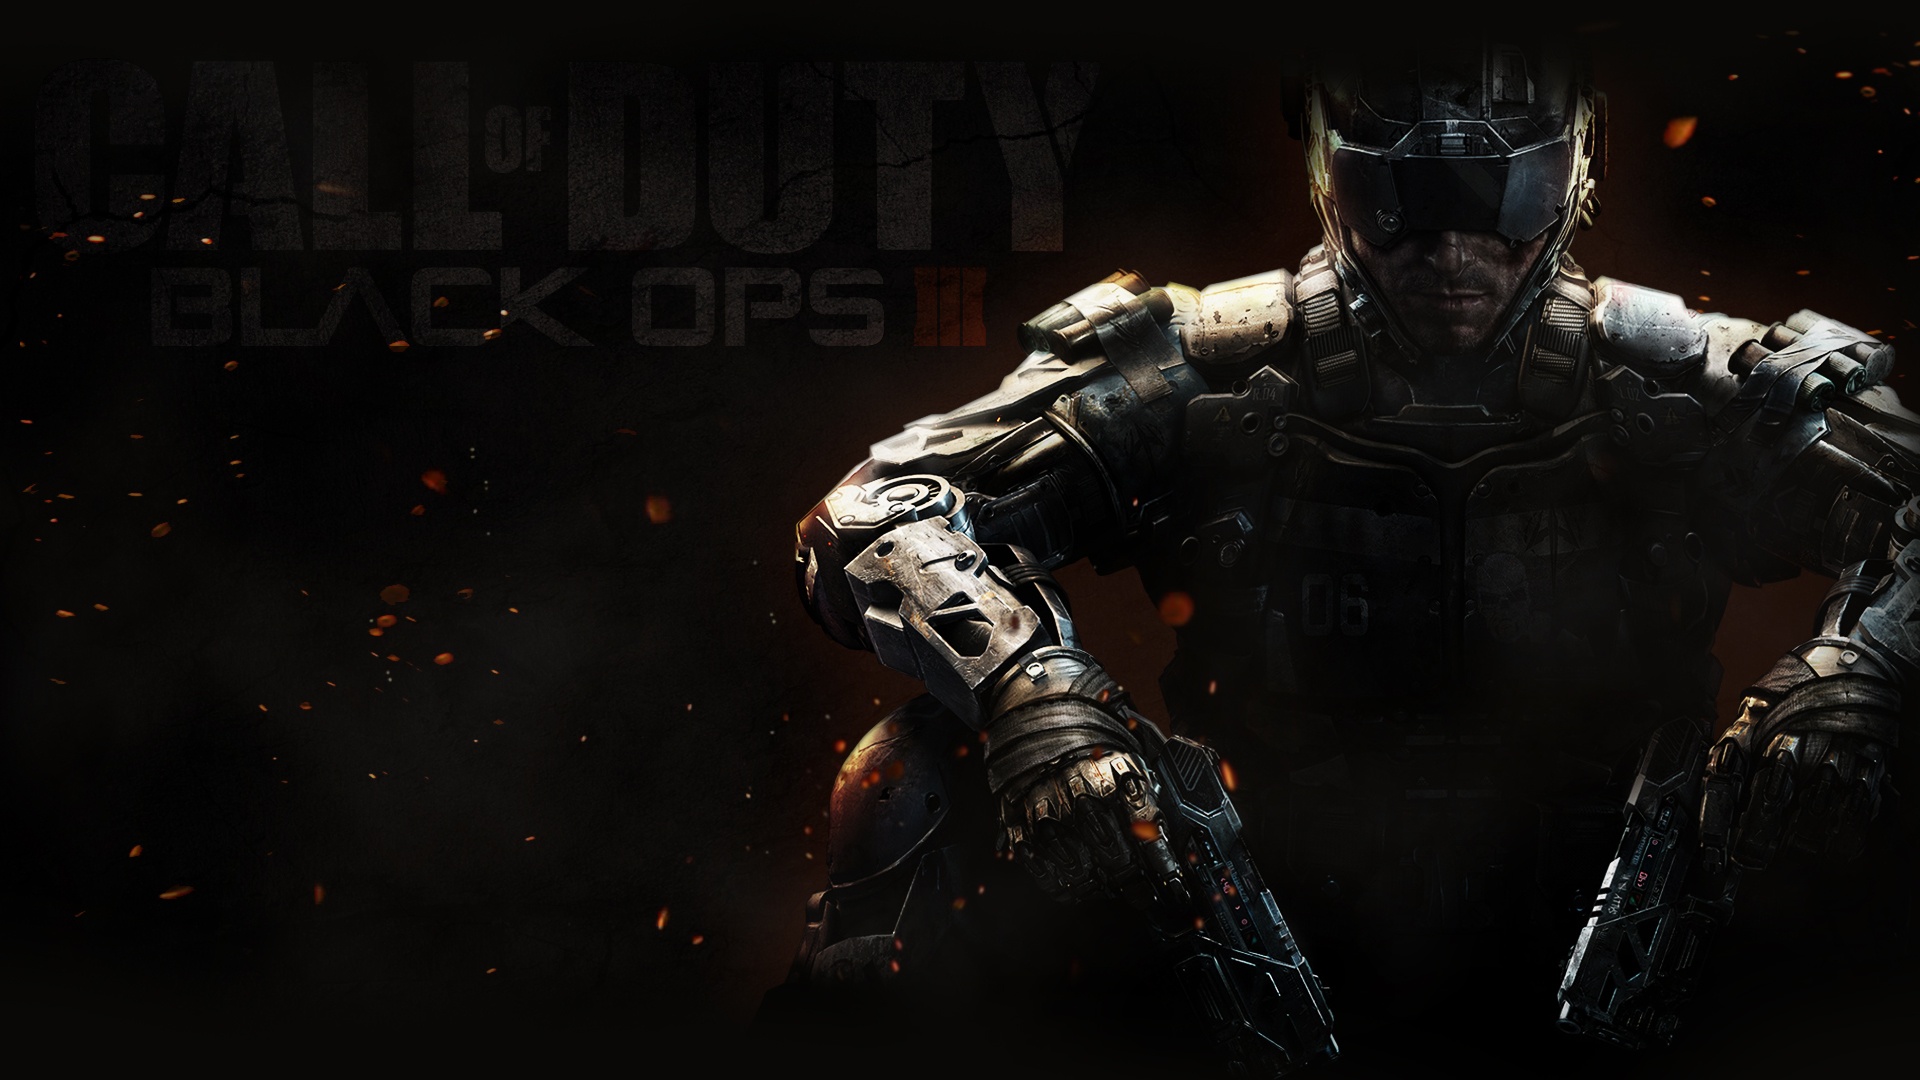 Video Game Call of Duty: Black Ops III HD Wallpaper | Background Image